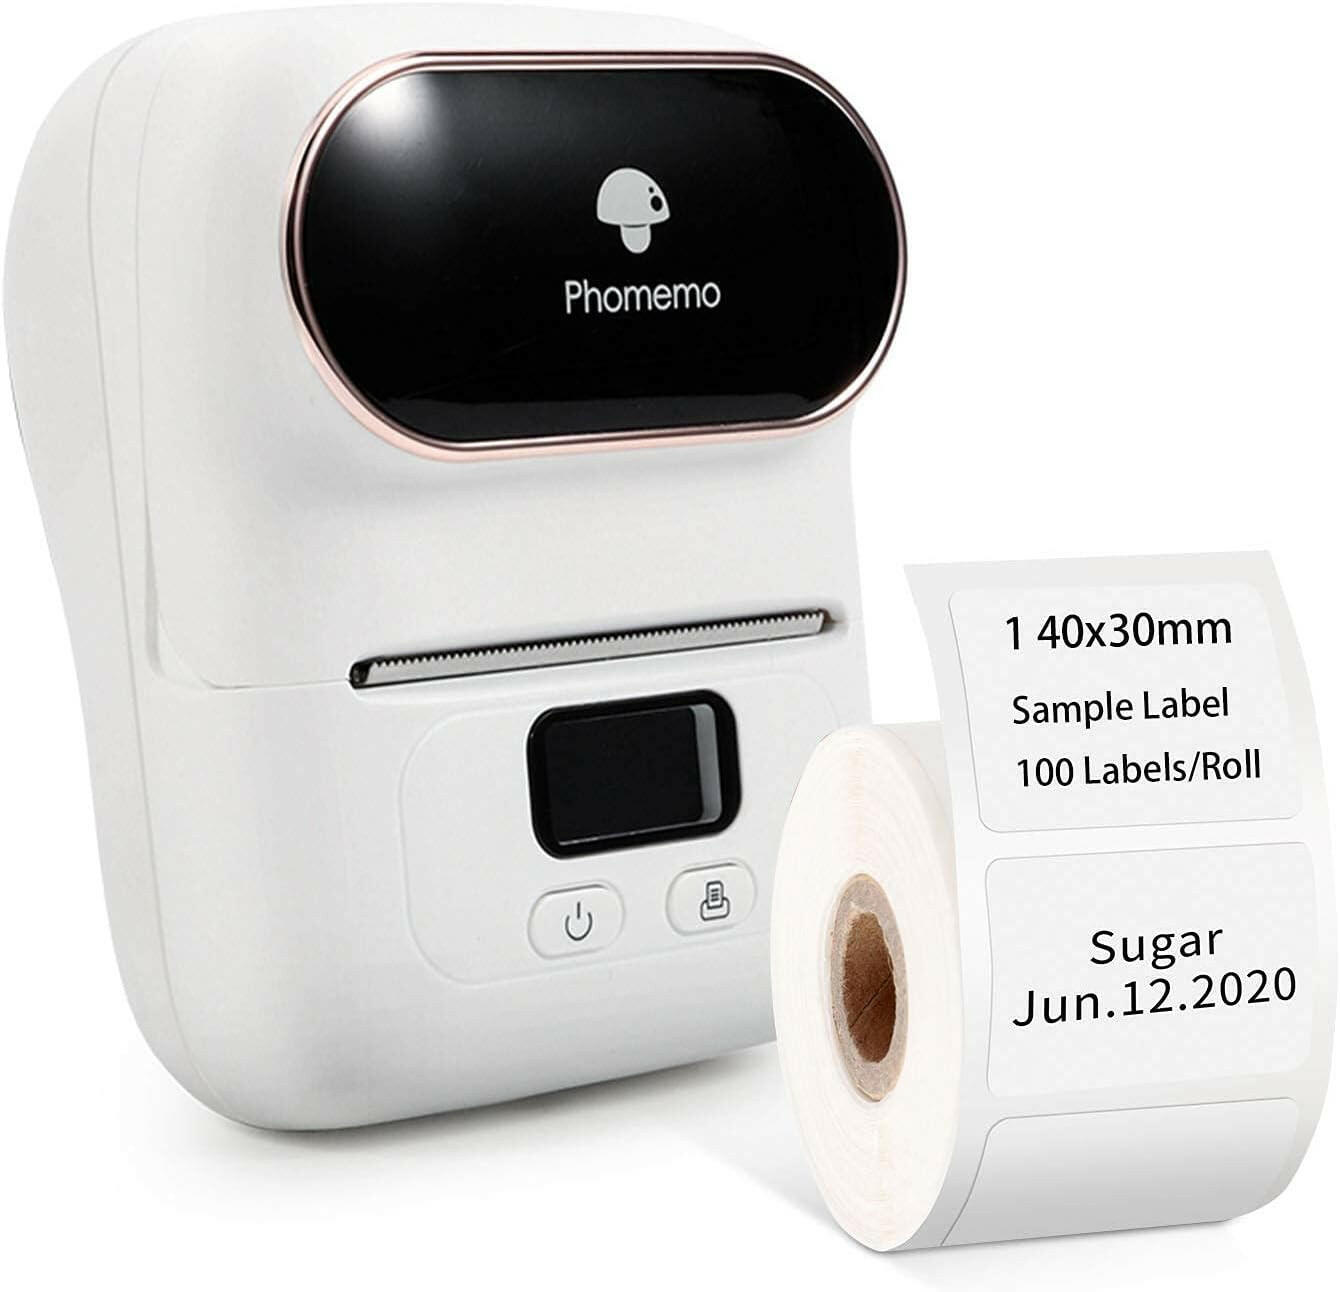 Label Sticker Maker Machine - Phomemo M110 Portable Bluetooth Thermal Label Printer. Sticker Maker, Barcode Printer, Arabic and English,For iOS & Android